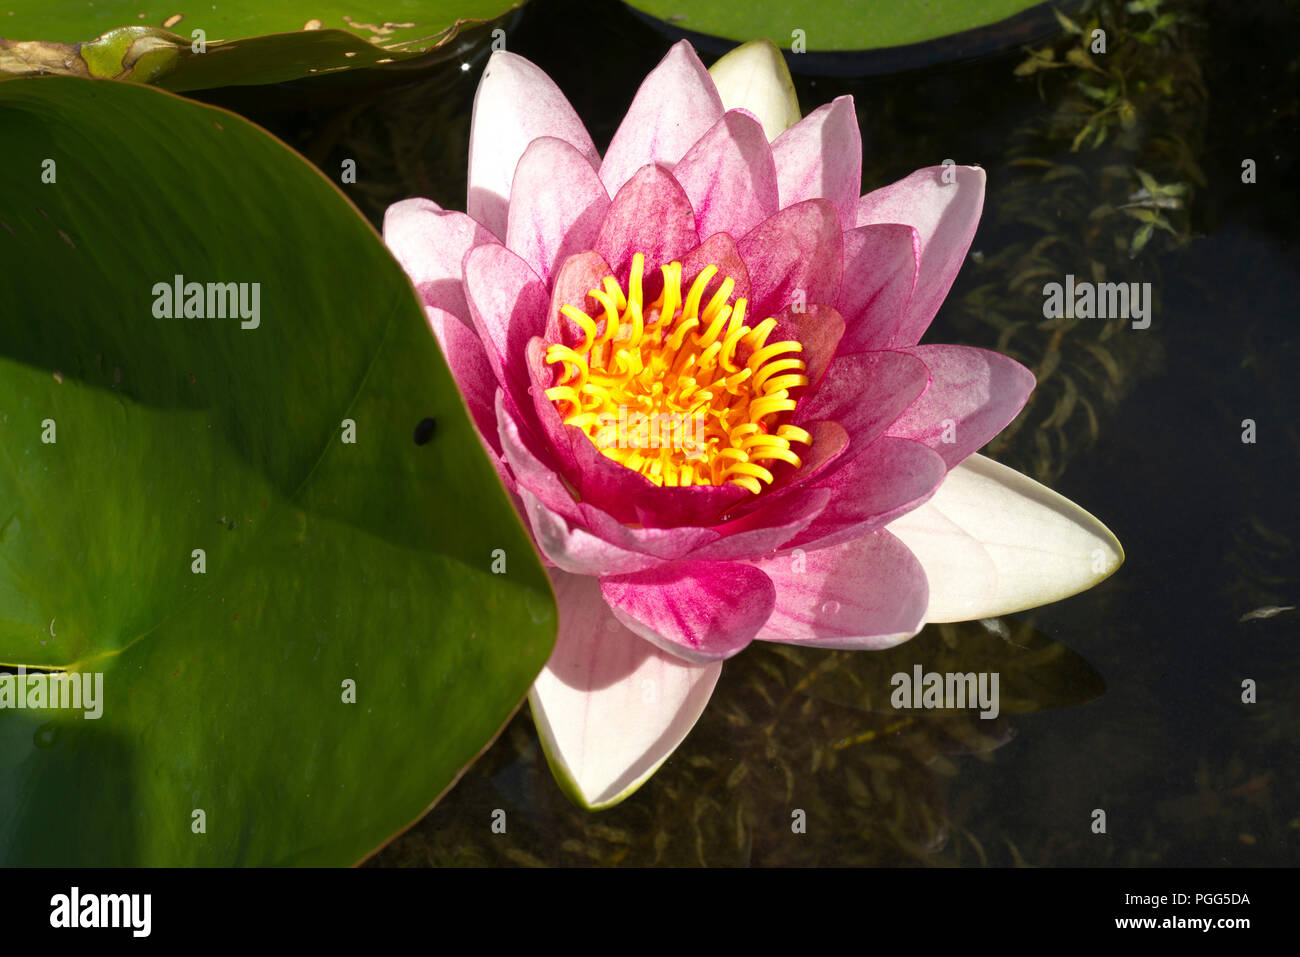 Pond life. A pink lily flower opens in the summer sunshine. Stock Photo